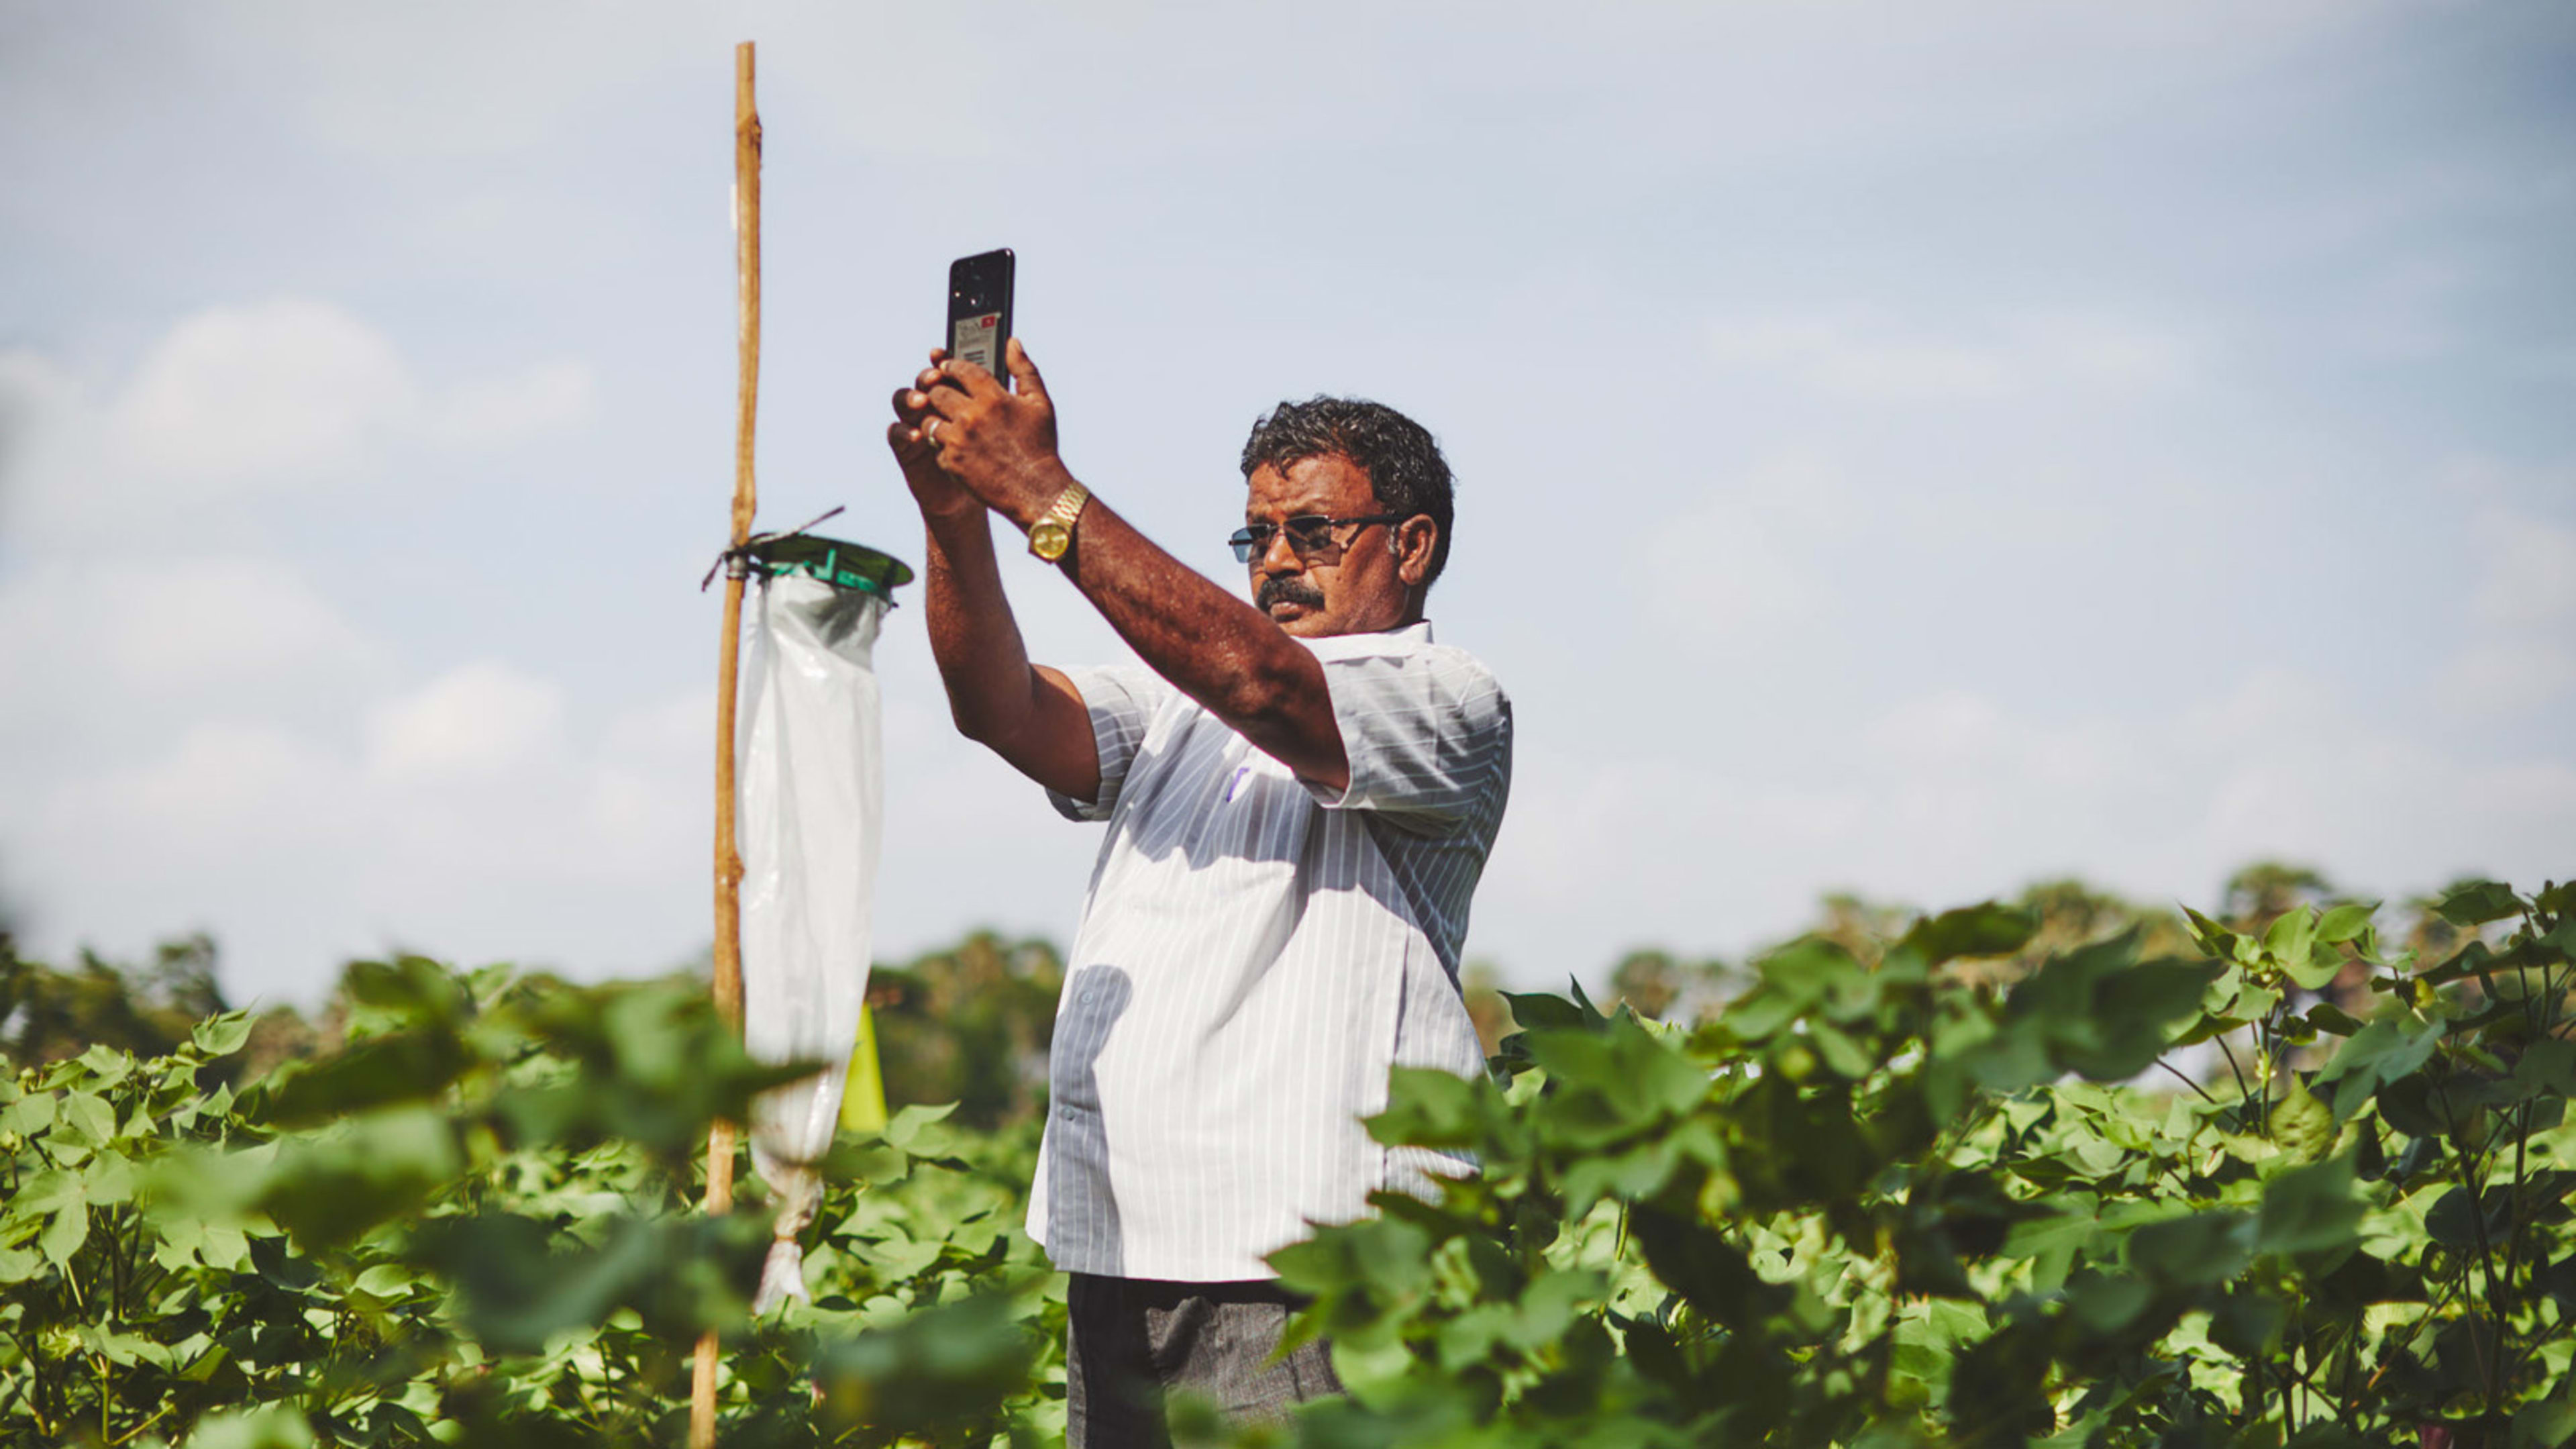 Google.org is helping deploy AI to prevent pests devastating Indian crops